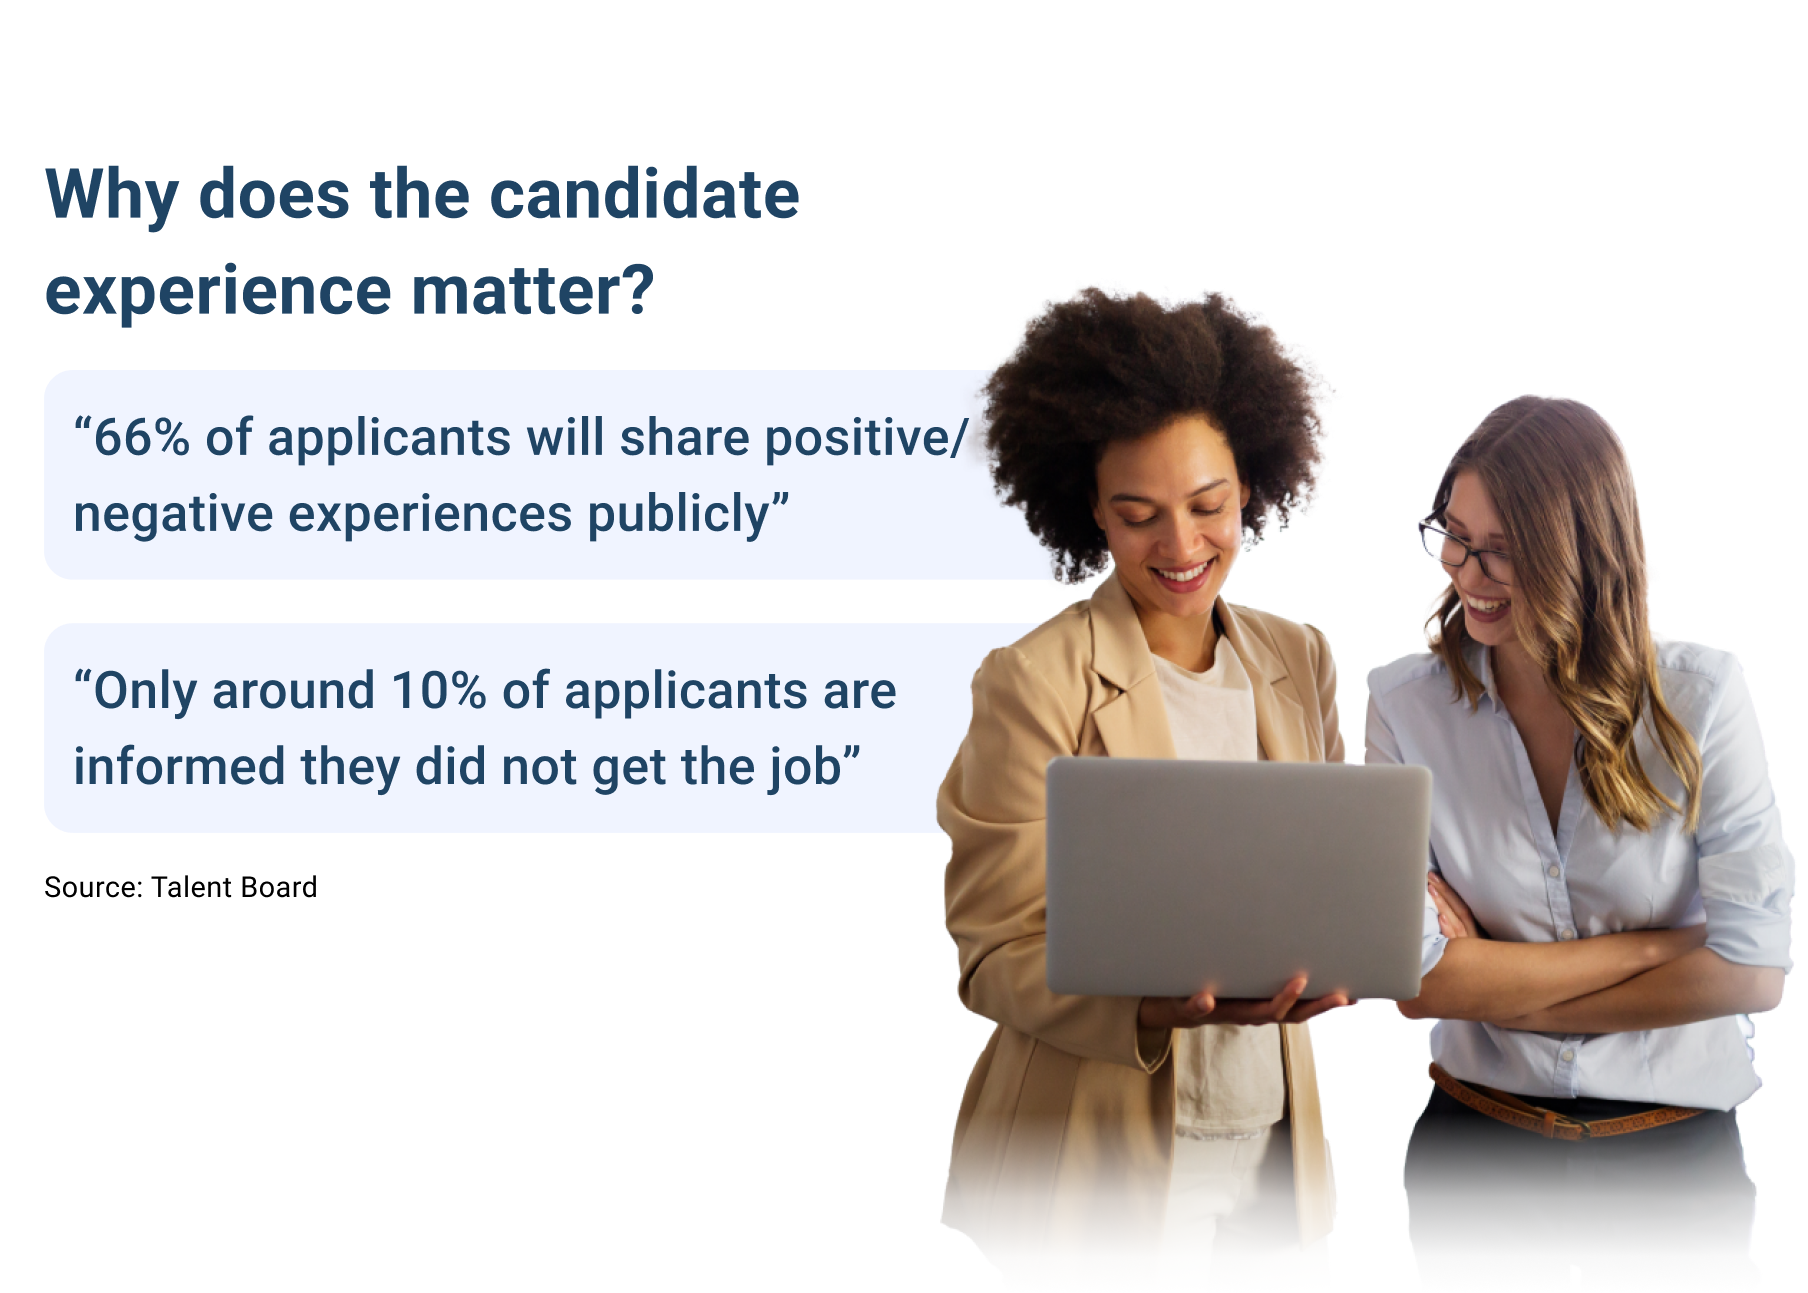 66% of applicants will share positive/negative experiences publicly. Only 10% of applicants are informed they didn't get the job.